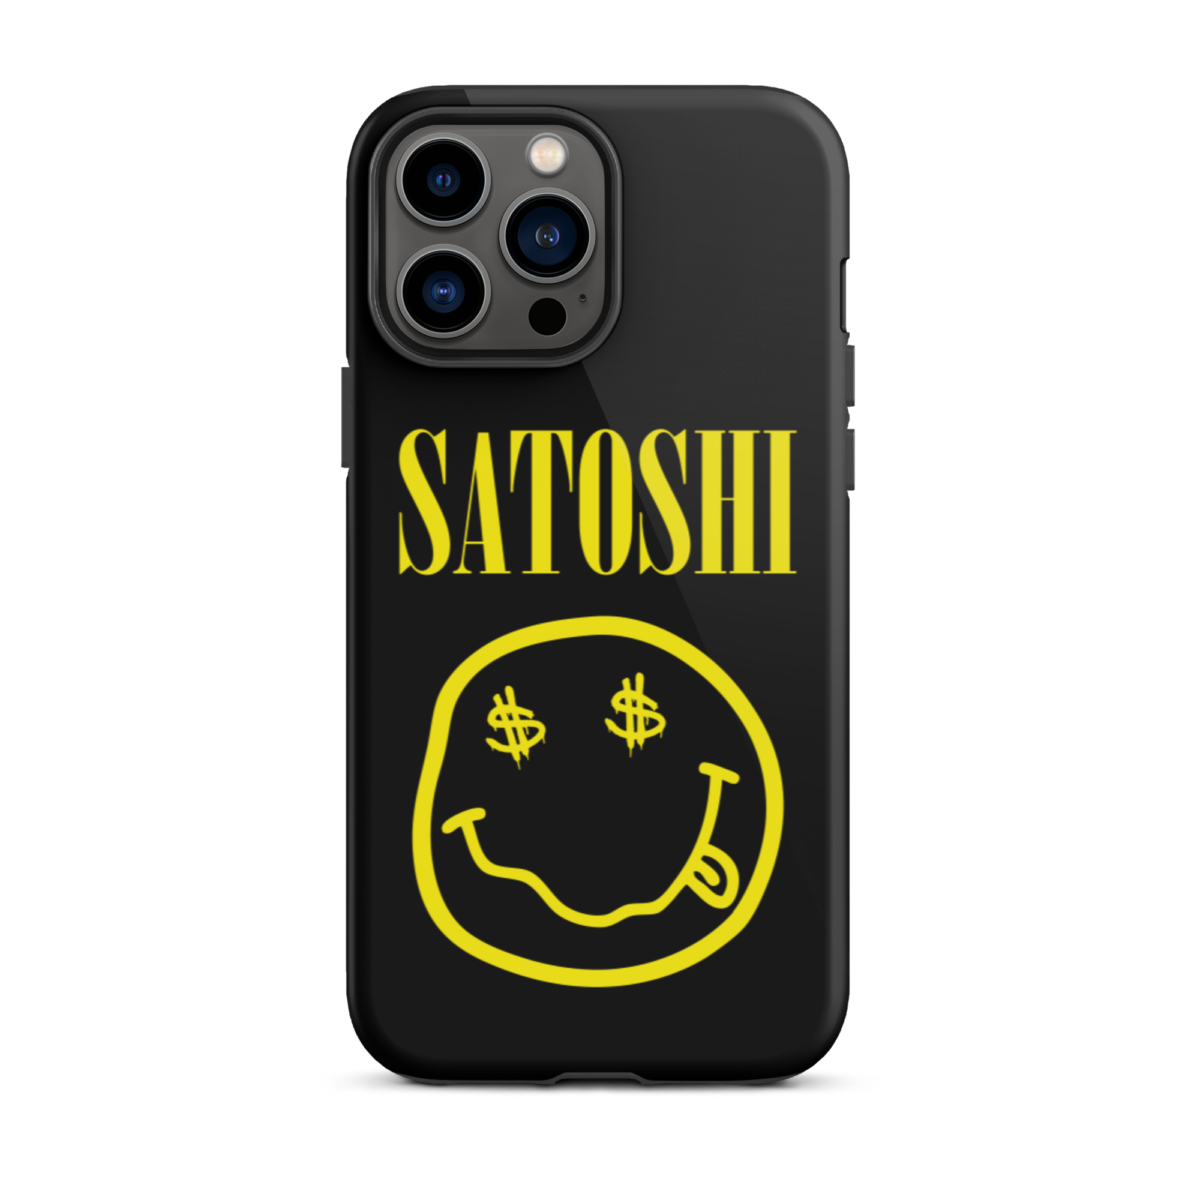 tough iphone case glossy iphone 13 pro max front 6397c1799ec05 - Satoshi YLW Tough iPhone Case